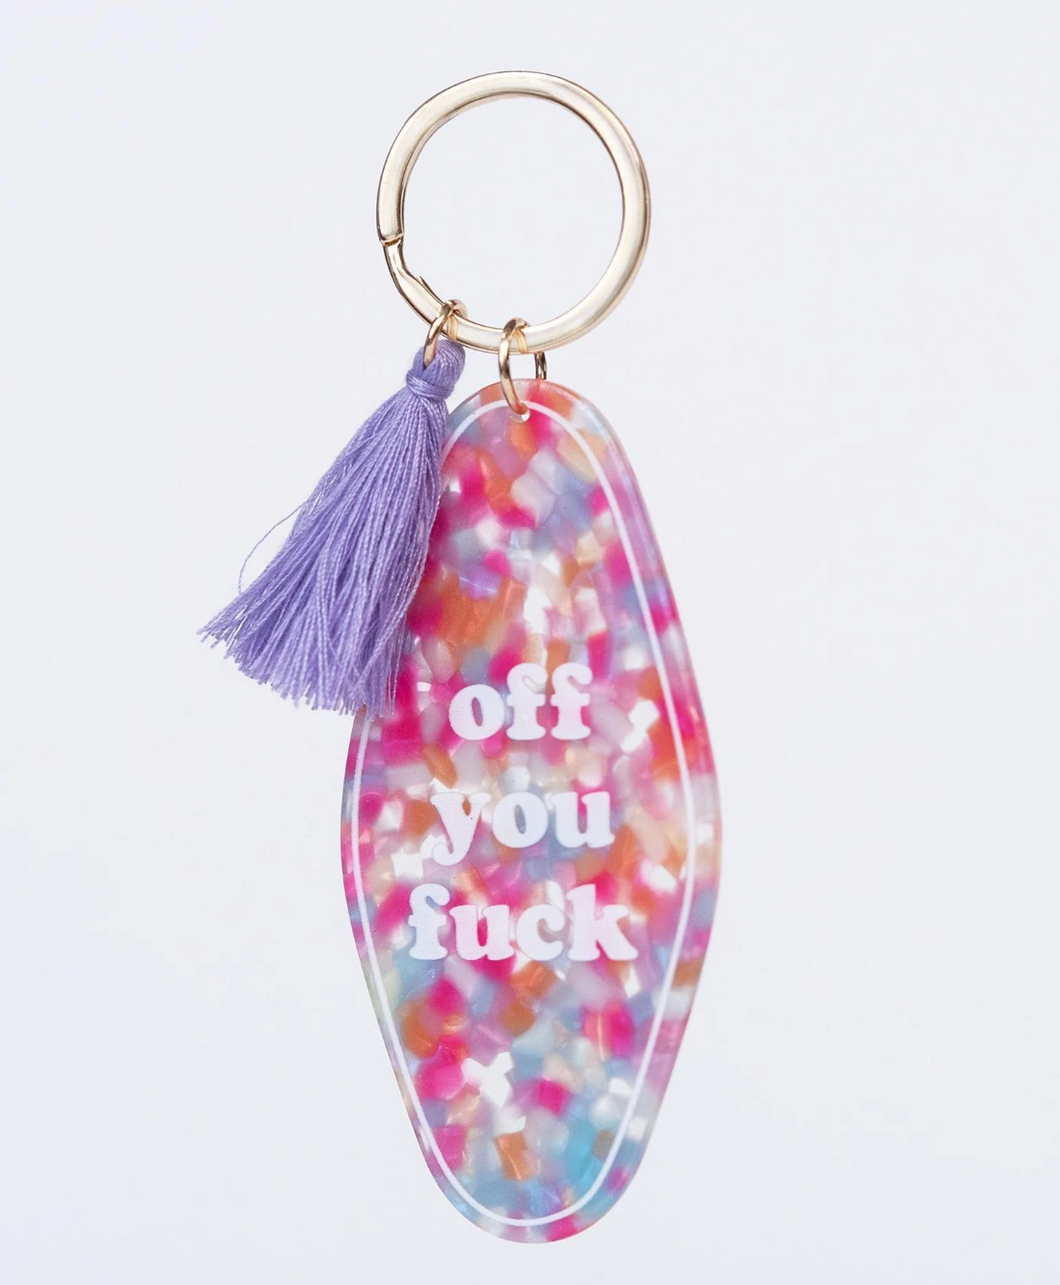 Off You F*ck Keychain